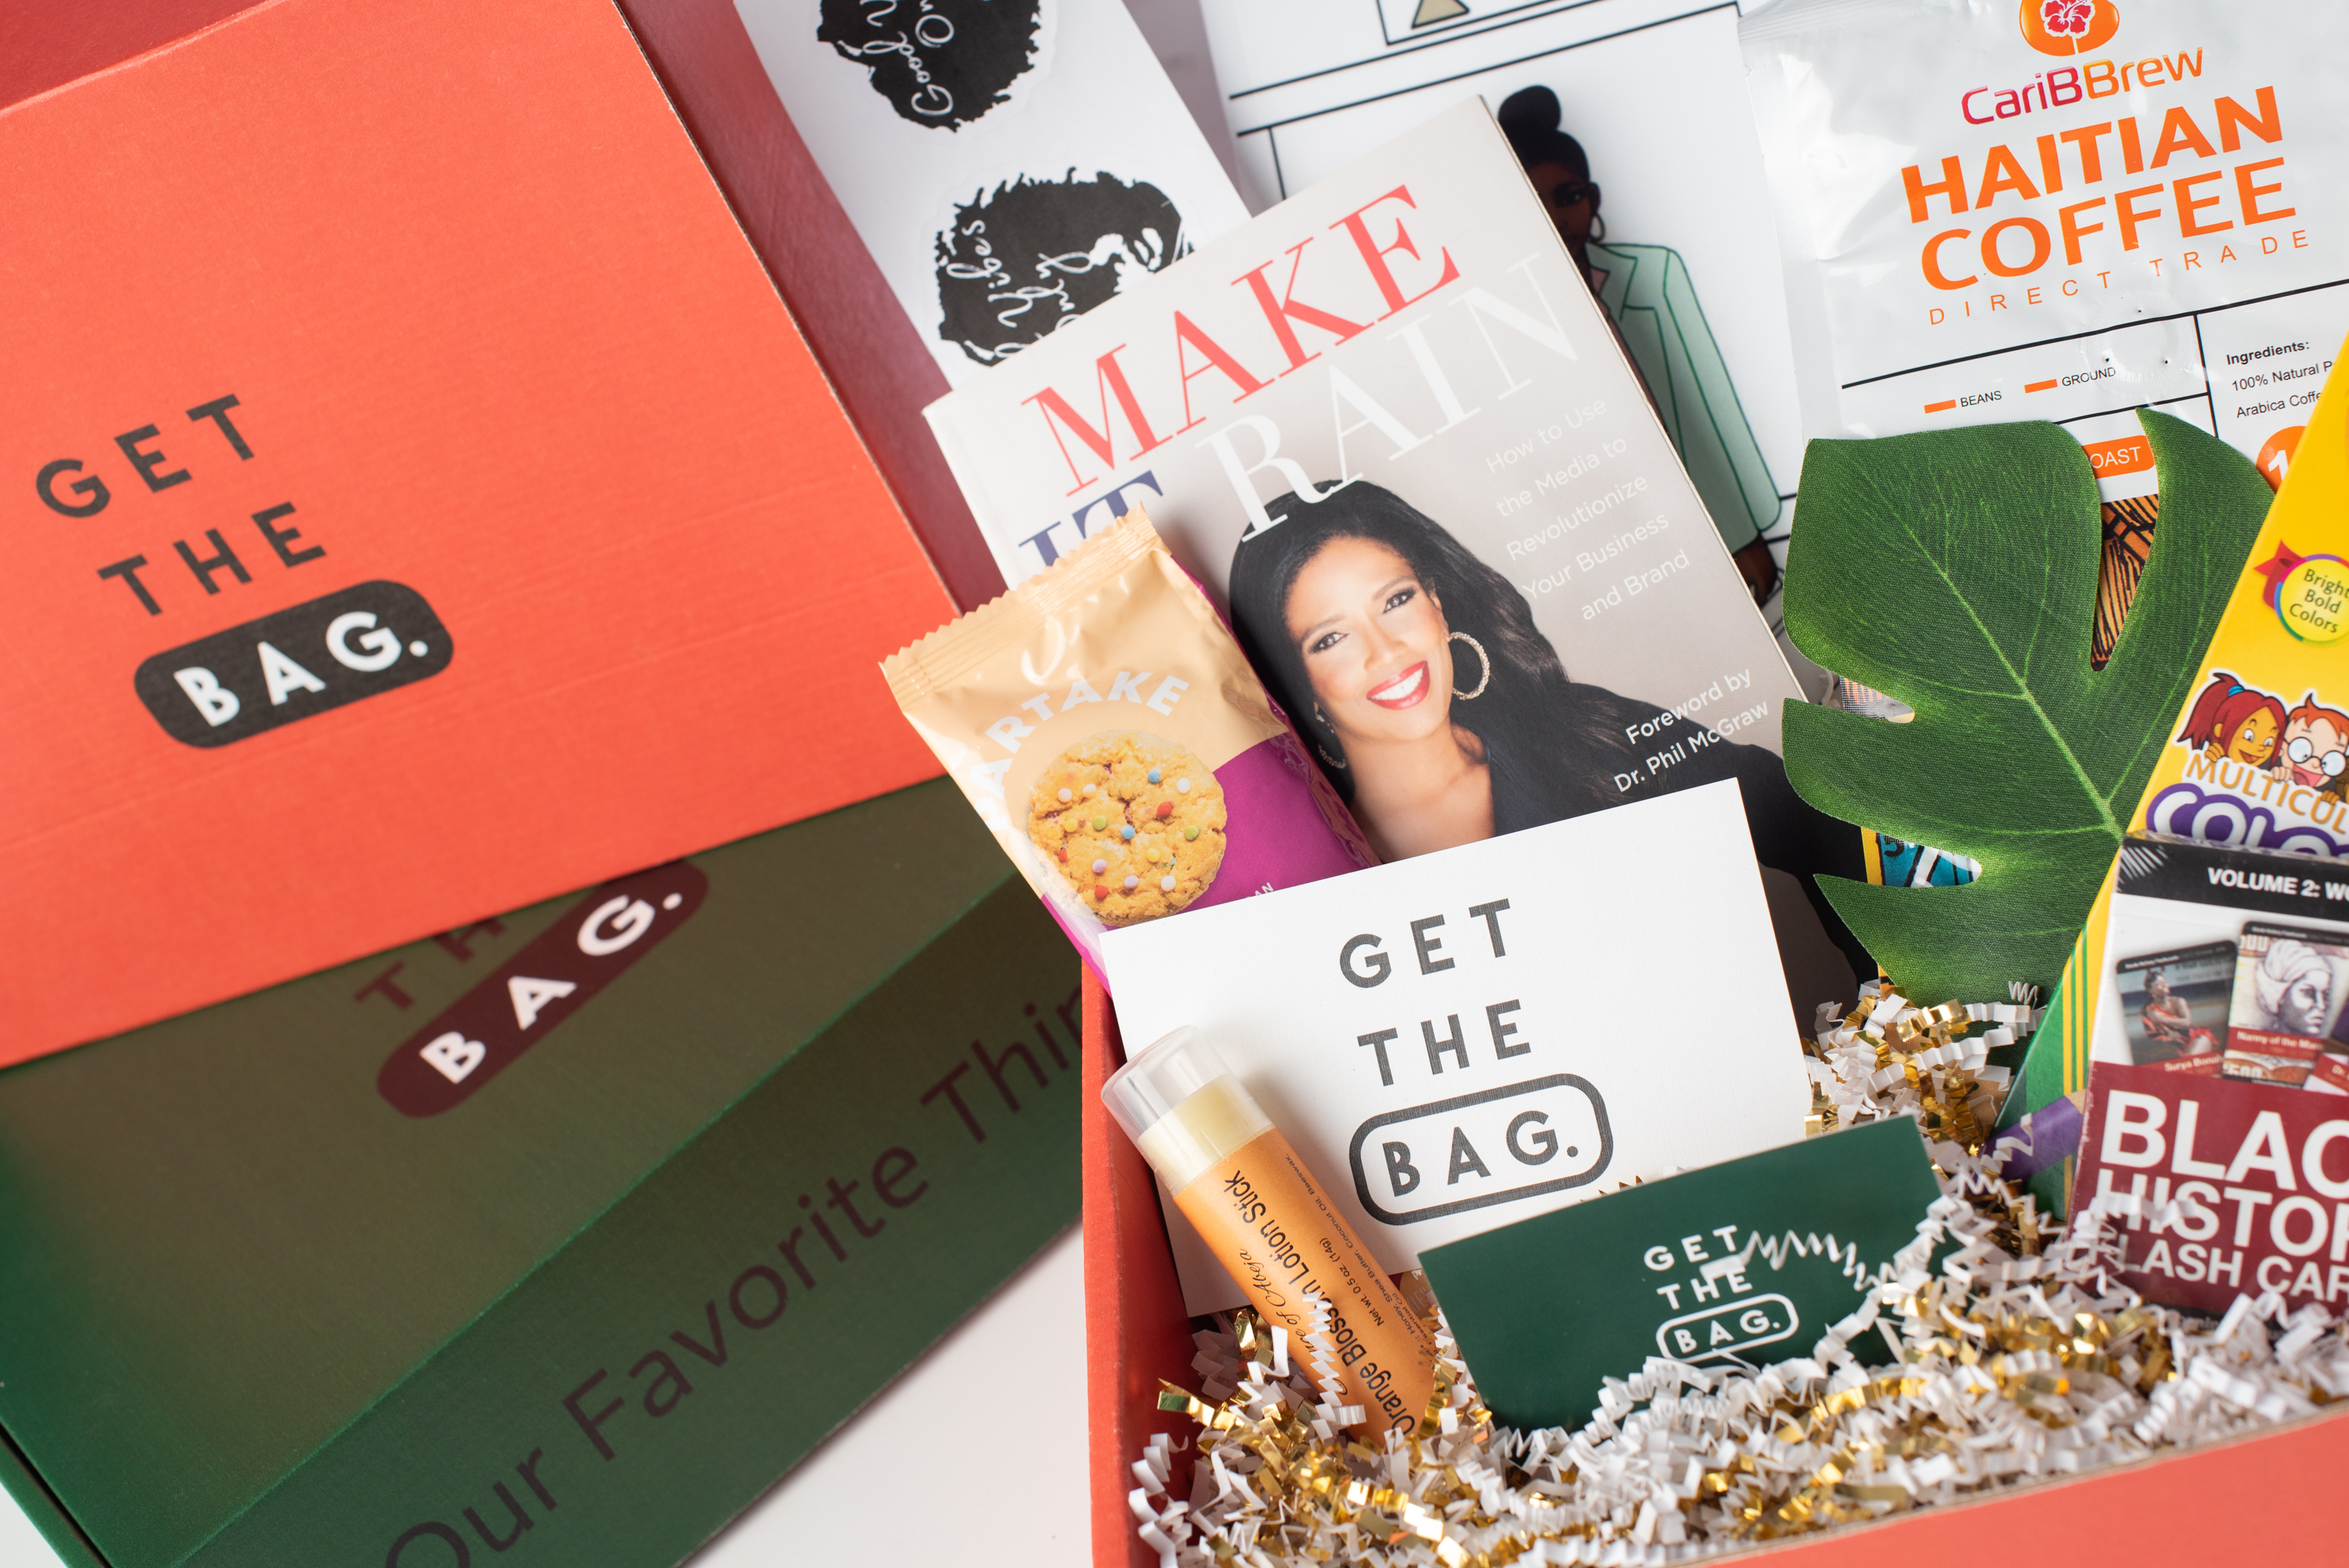 Get The Bag Subscription Box Image